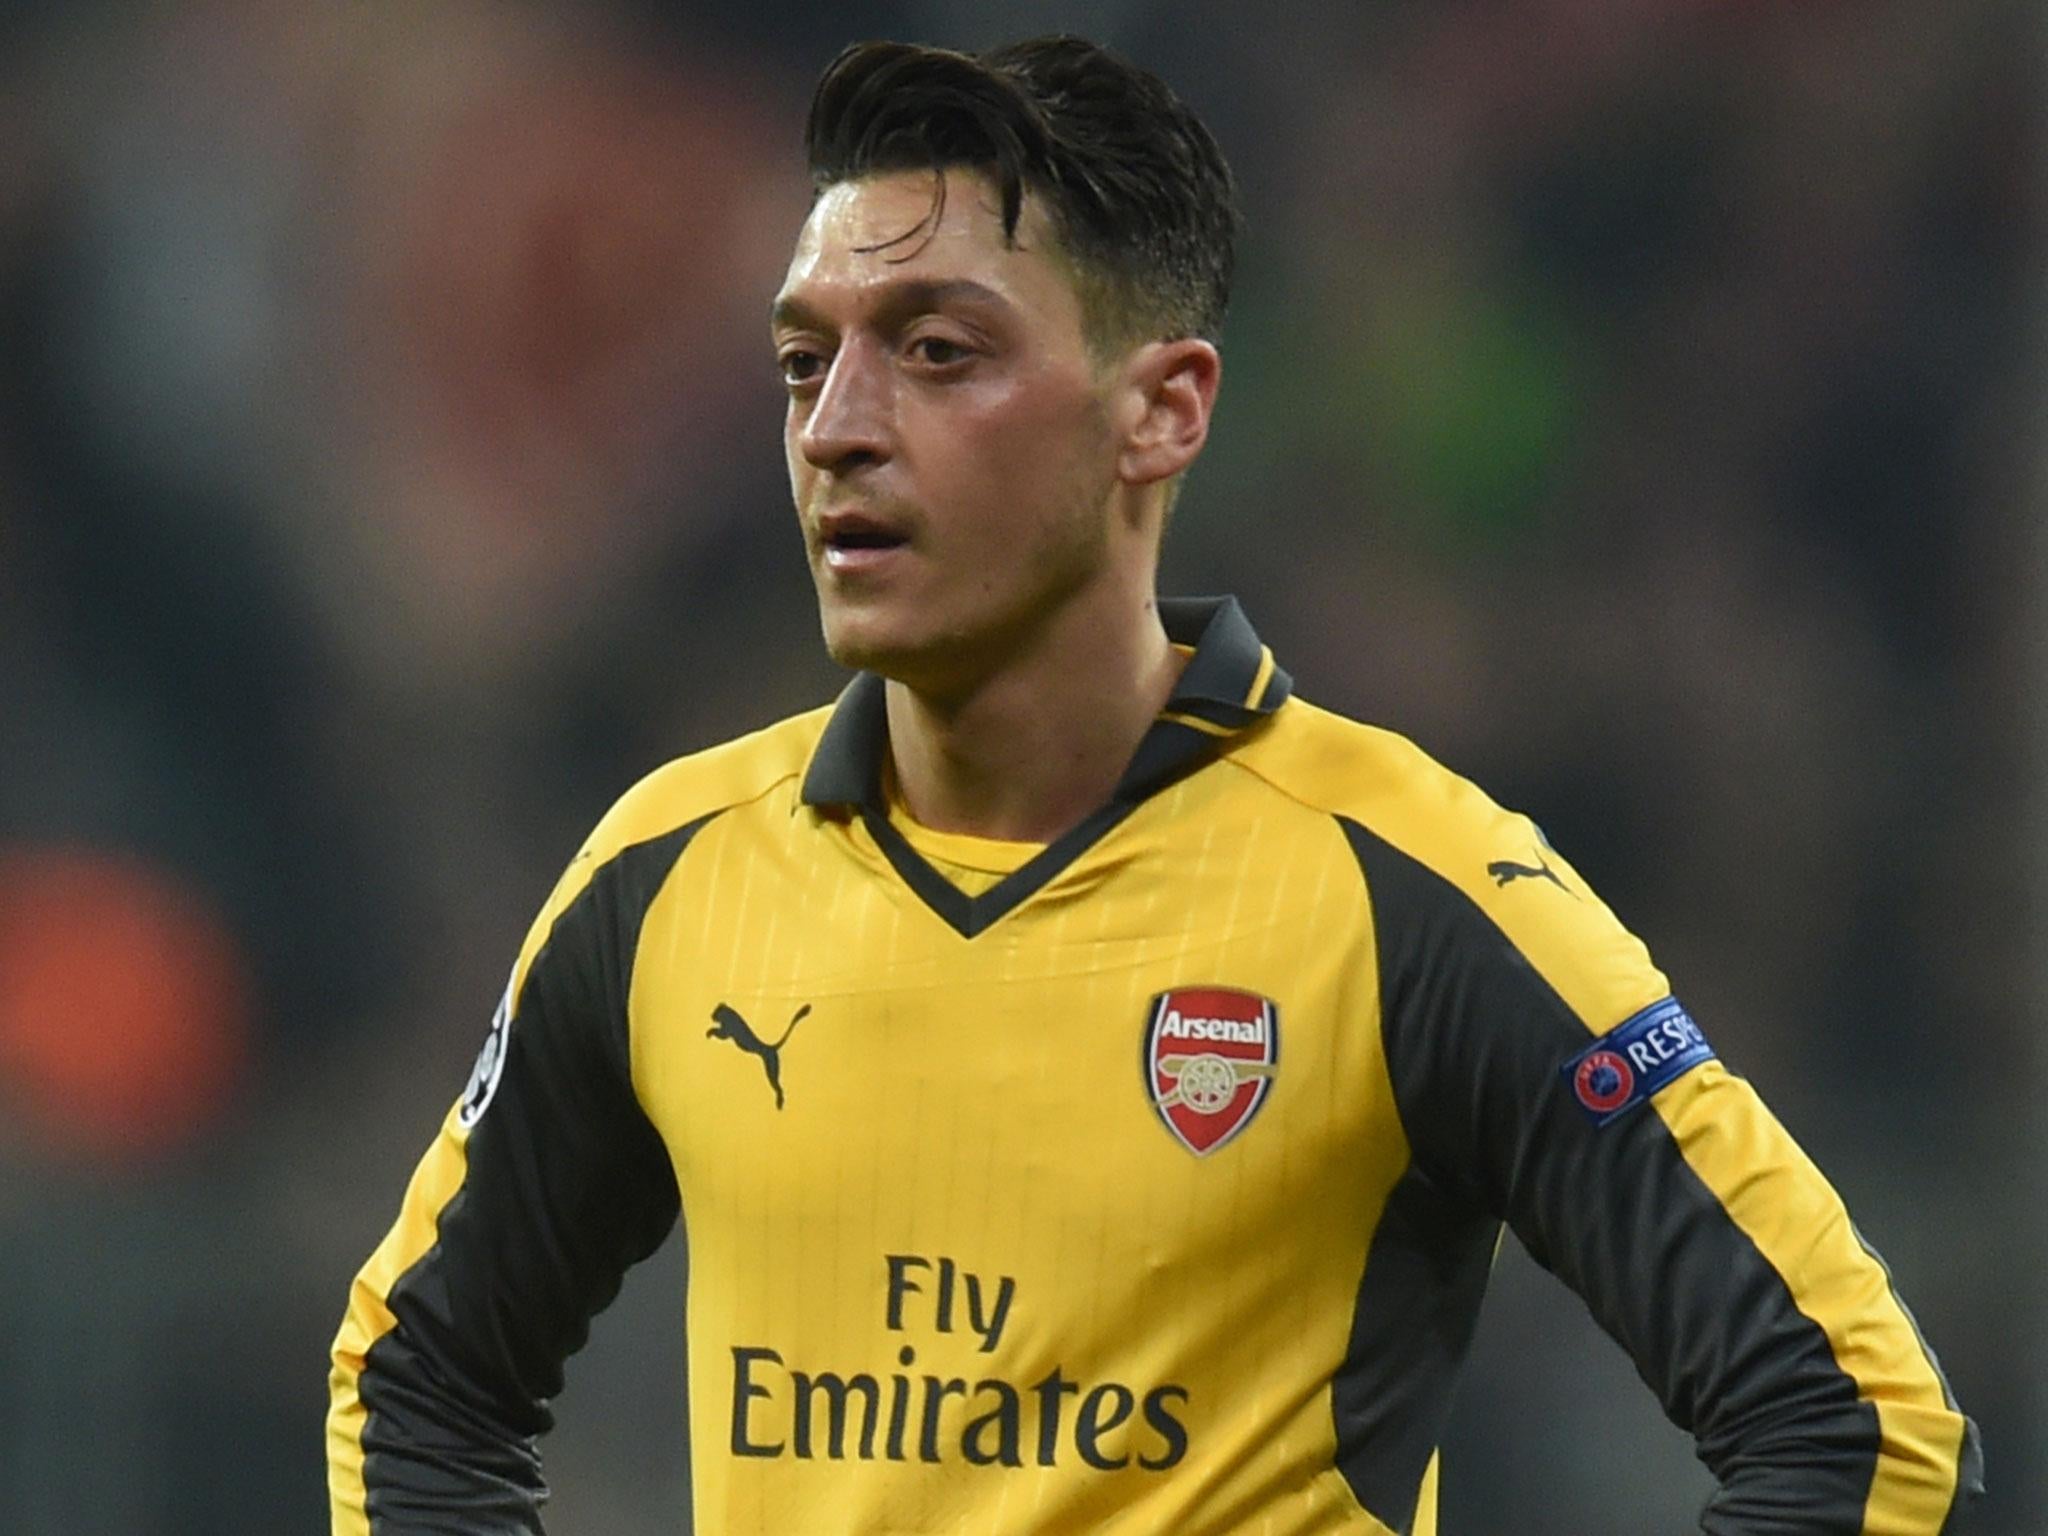 Mesut Özil has flown back to Germany after being time off by Arsenal